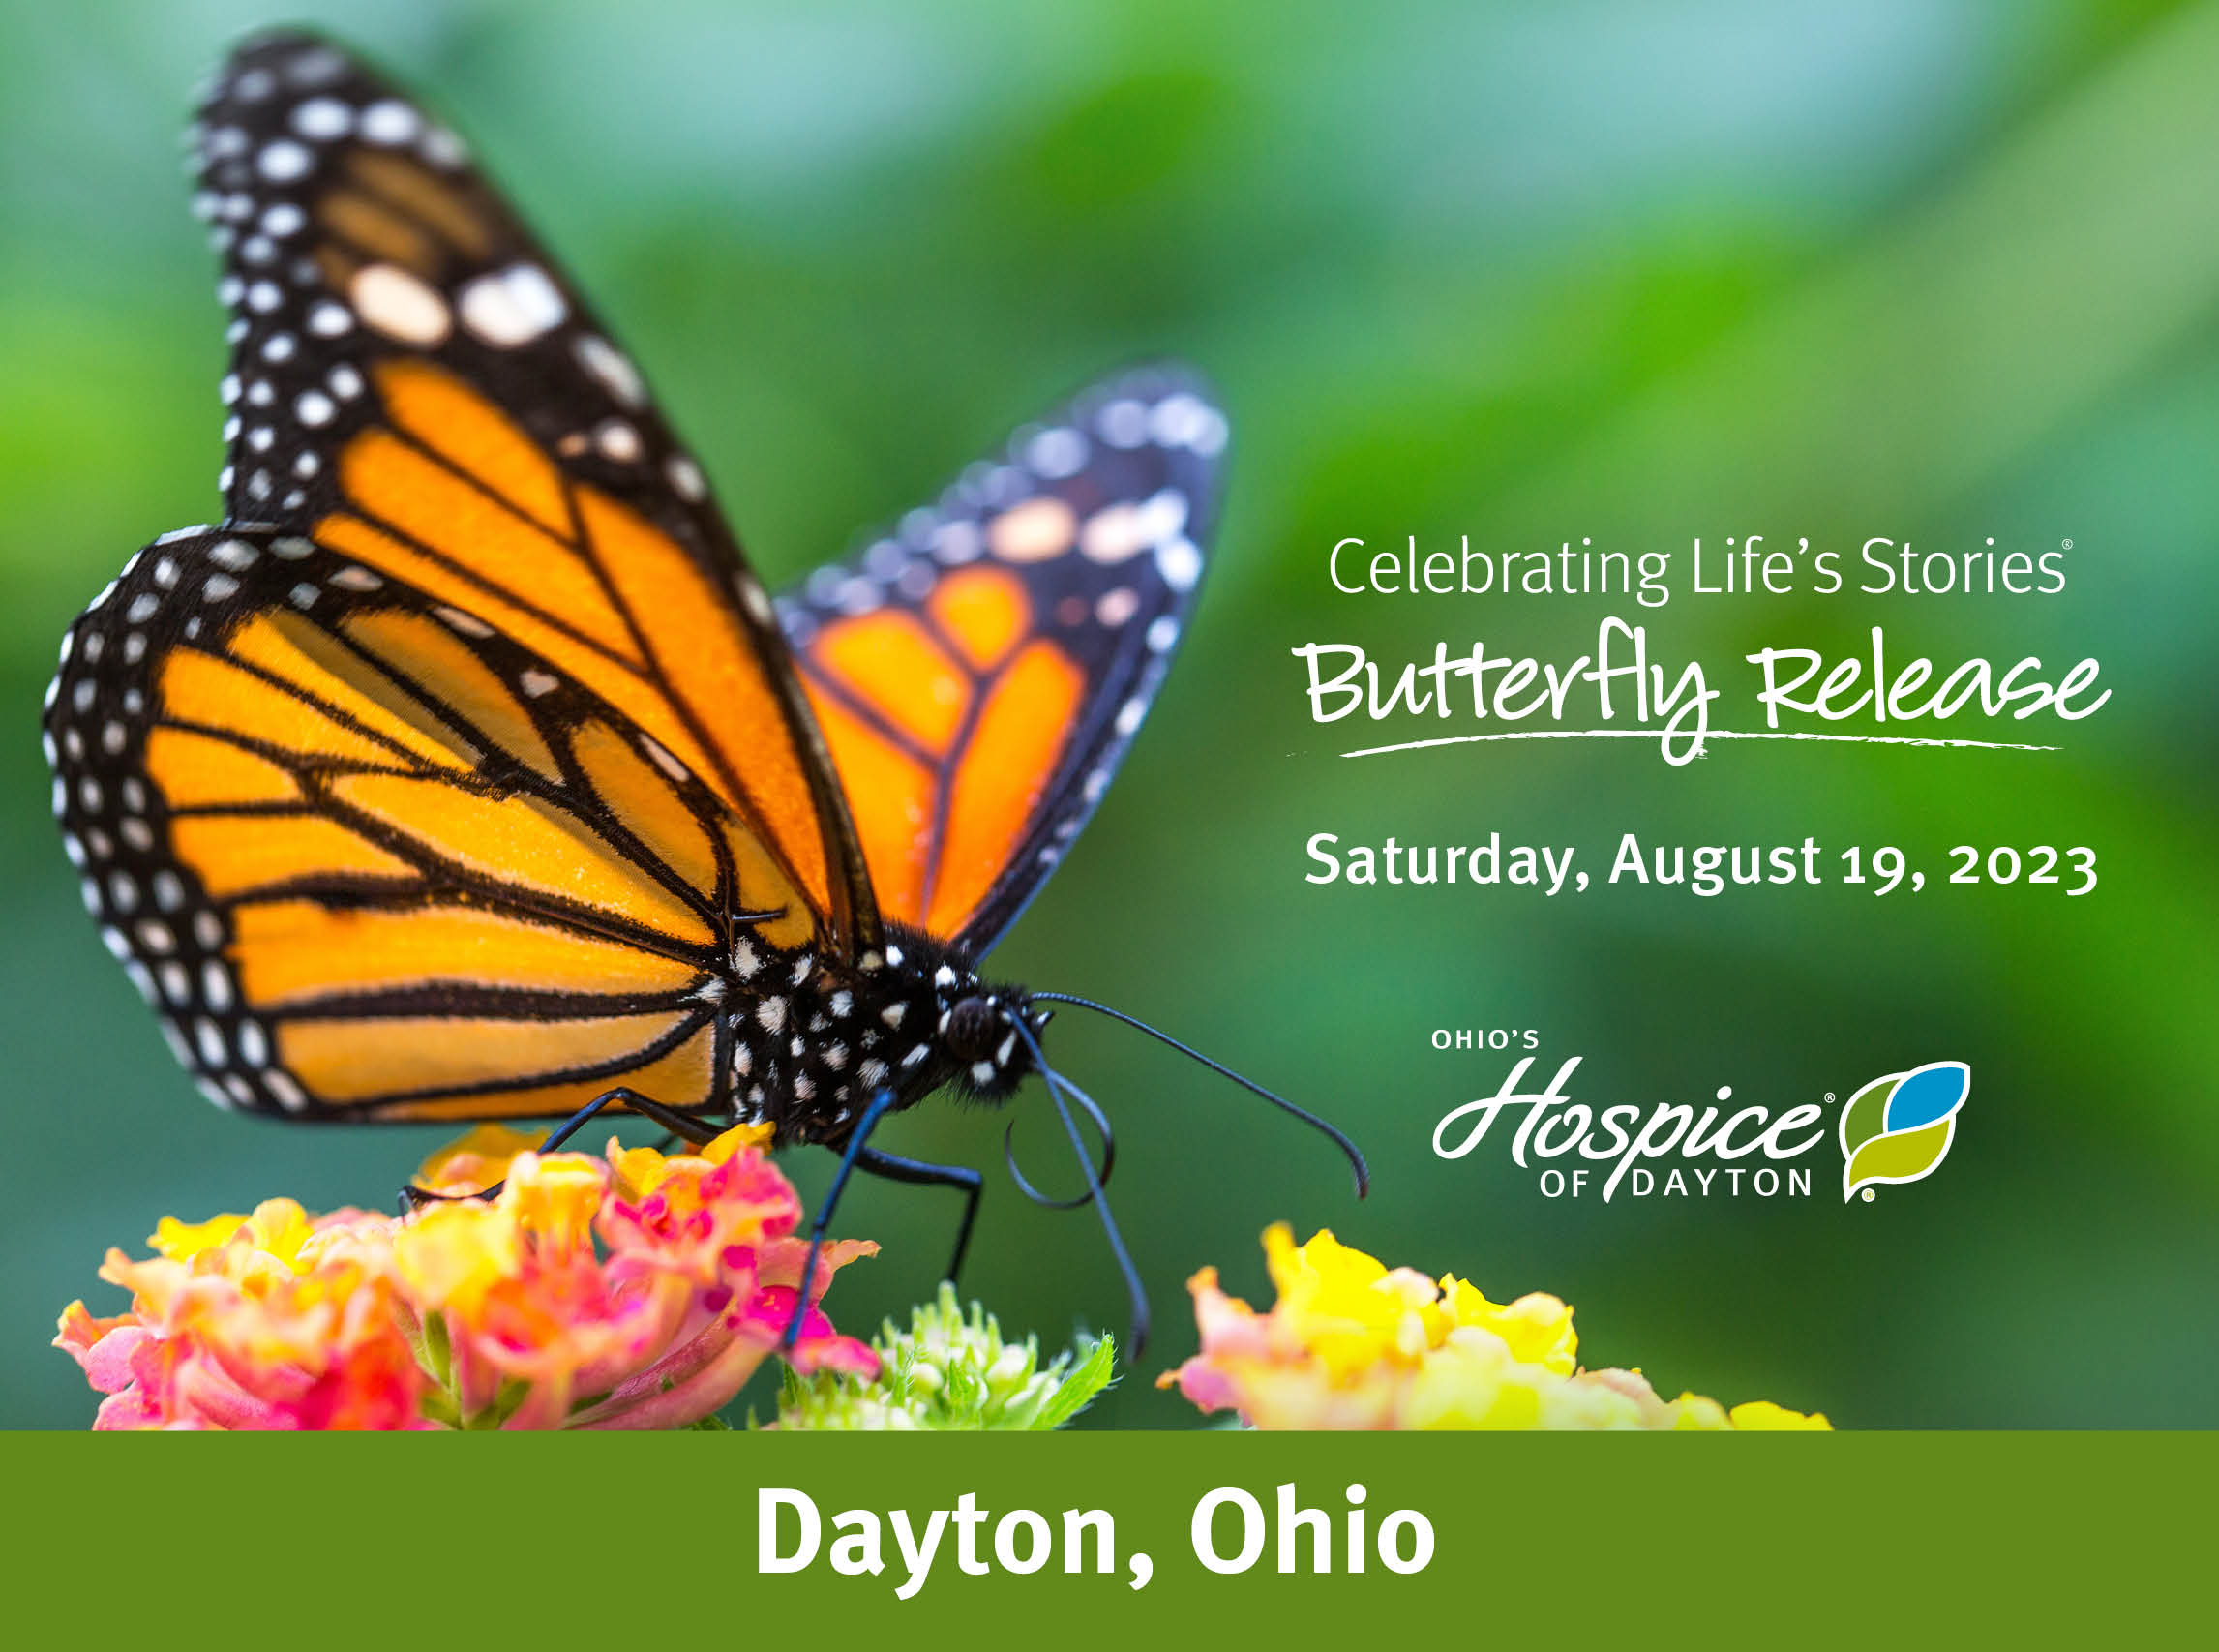 Celebrating Life's Stories Butterfly Release, Saturday, August 19, 2023, Ohio's Hospice of Dayton, Dayton, Ohio